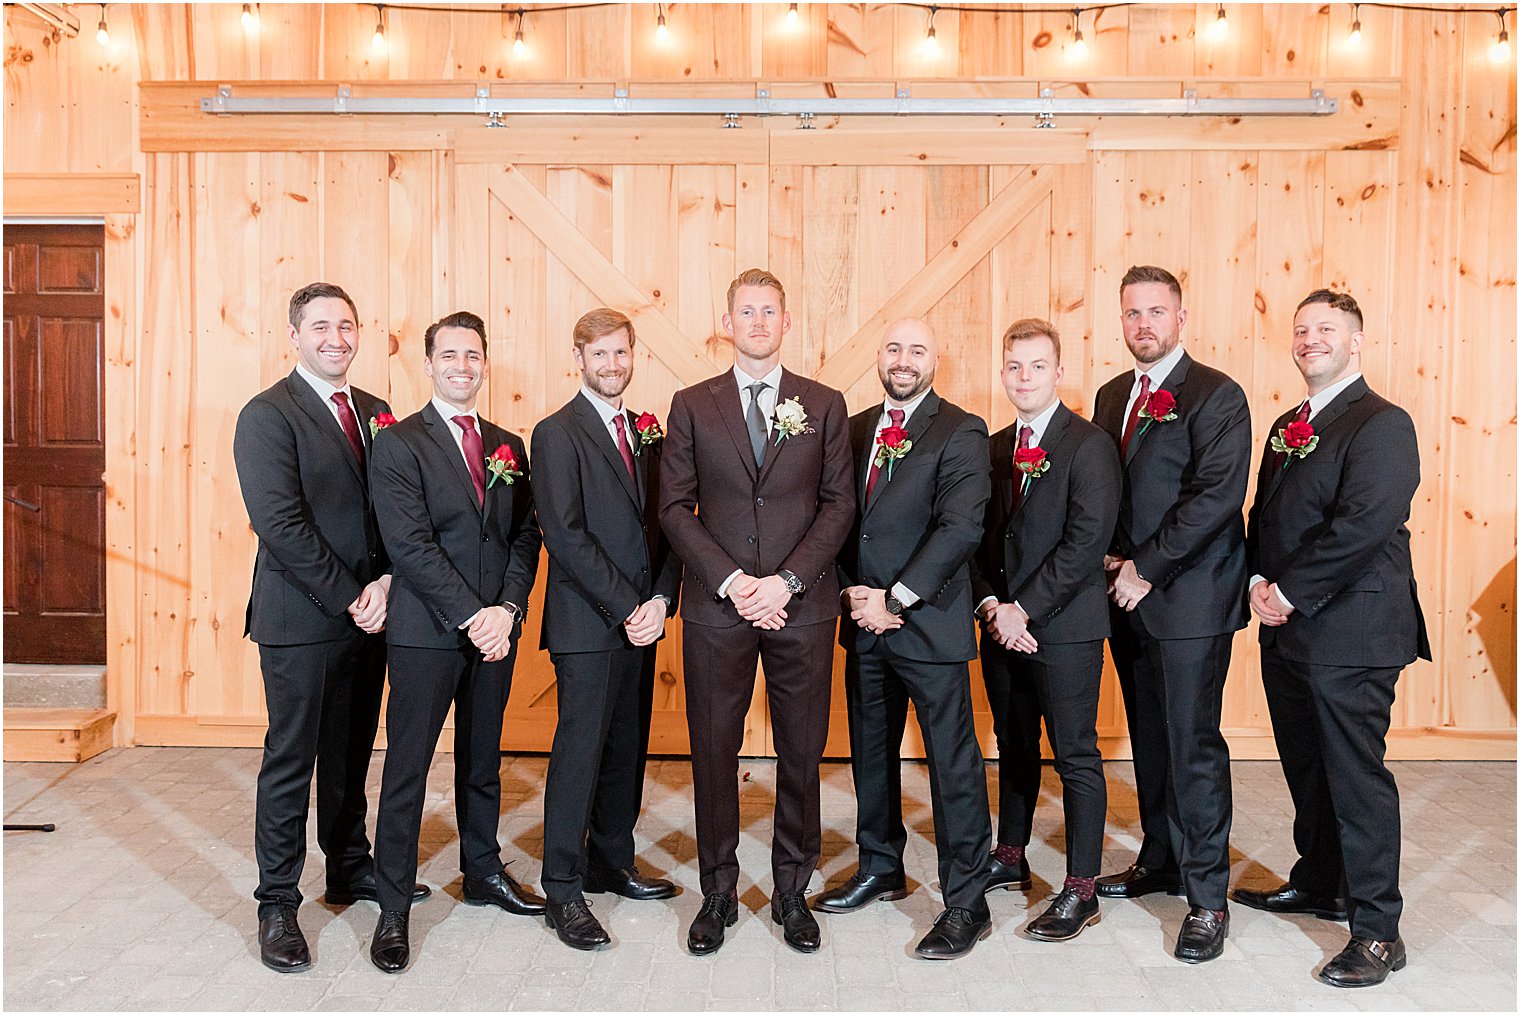 groom and groomsmen pose together by wooden wall